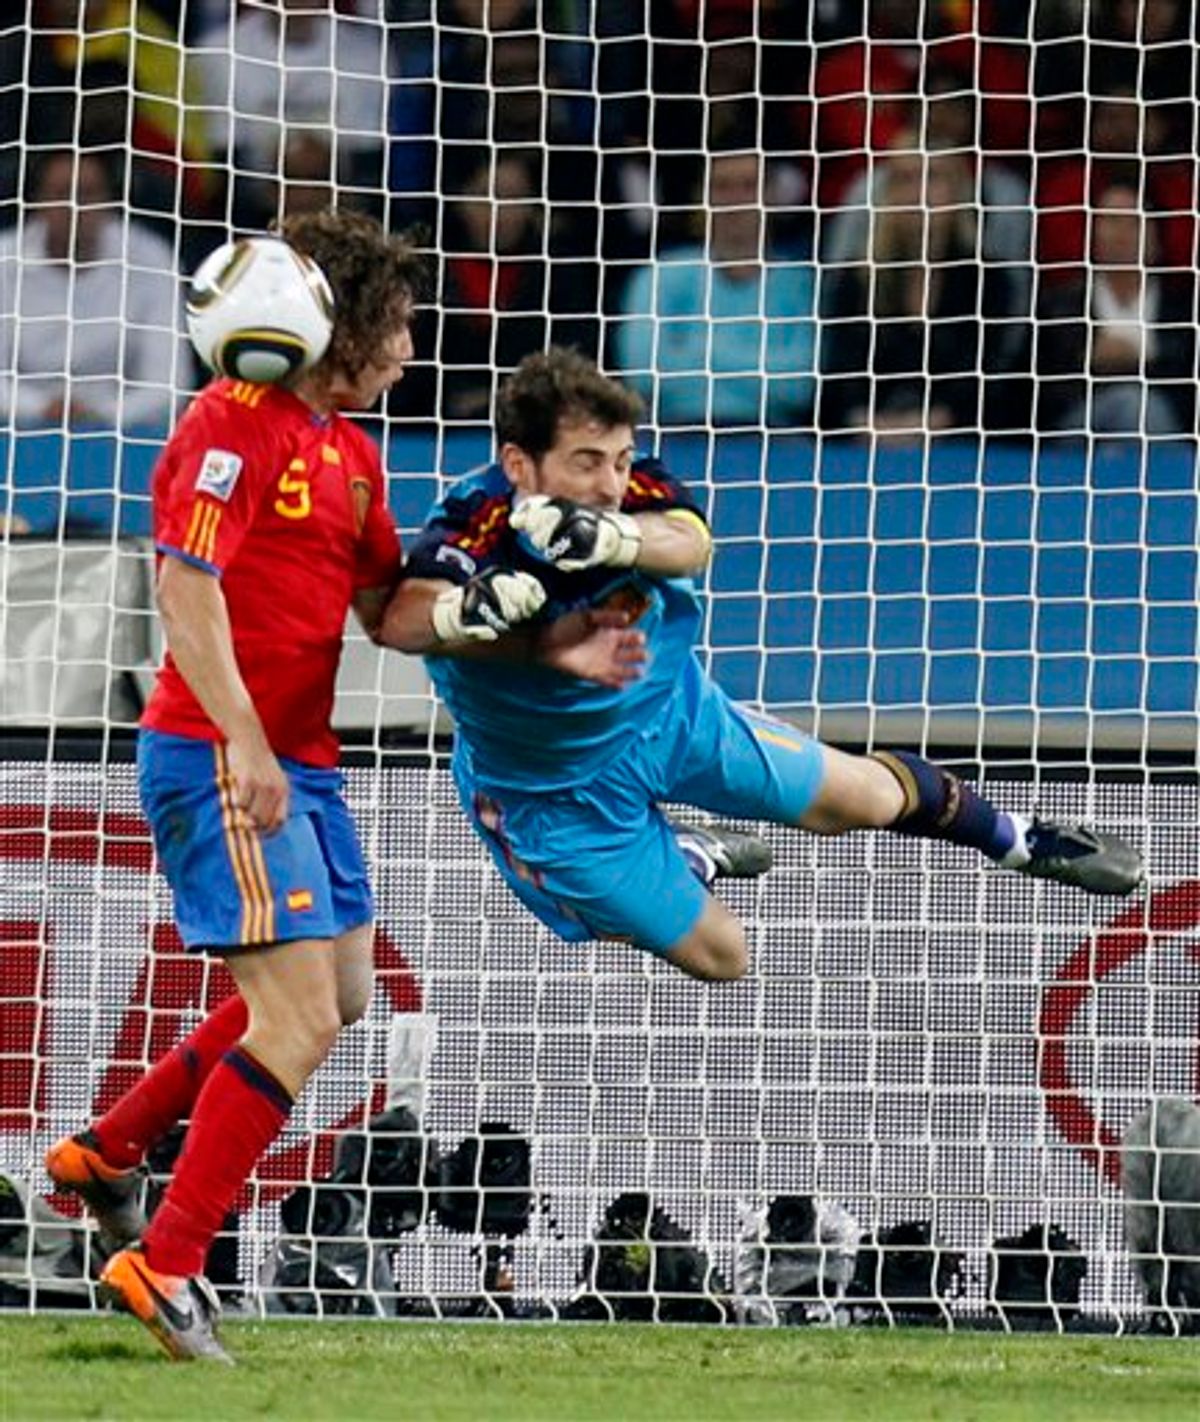 Spain goalkeeper Iker Casillas, right, clears the ball next to Spain's Carles Puyol, left, during the World Cup semifinal soccer match between  Germany and Spain at the stadium in Durban, South Africa, Wednesday, July 7, 2010.  (AP Photo/Luca Bruno)   (AP)